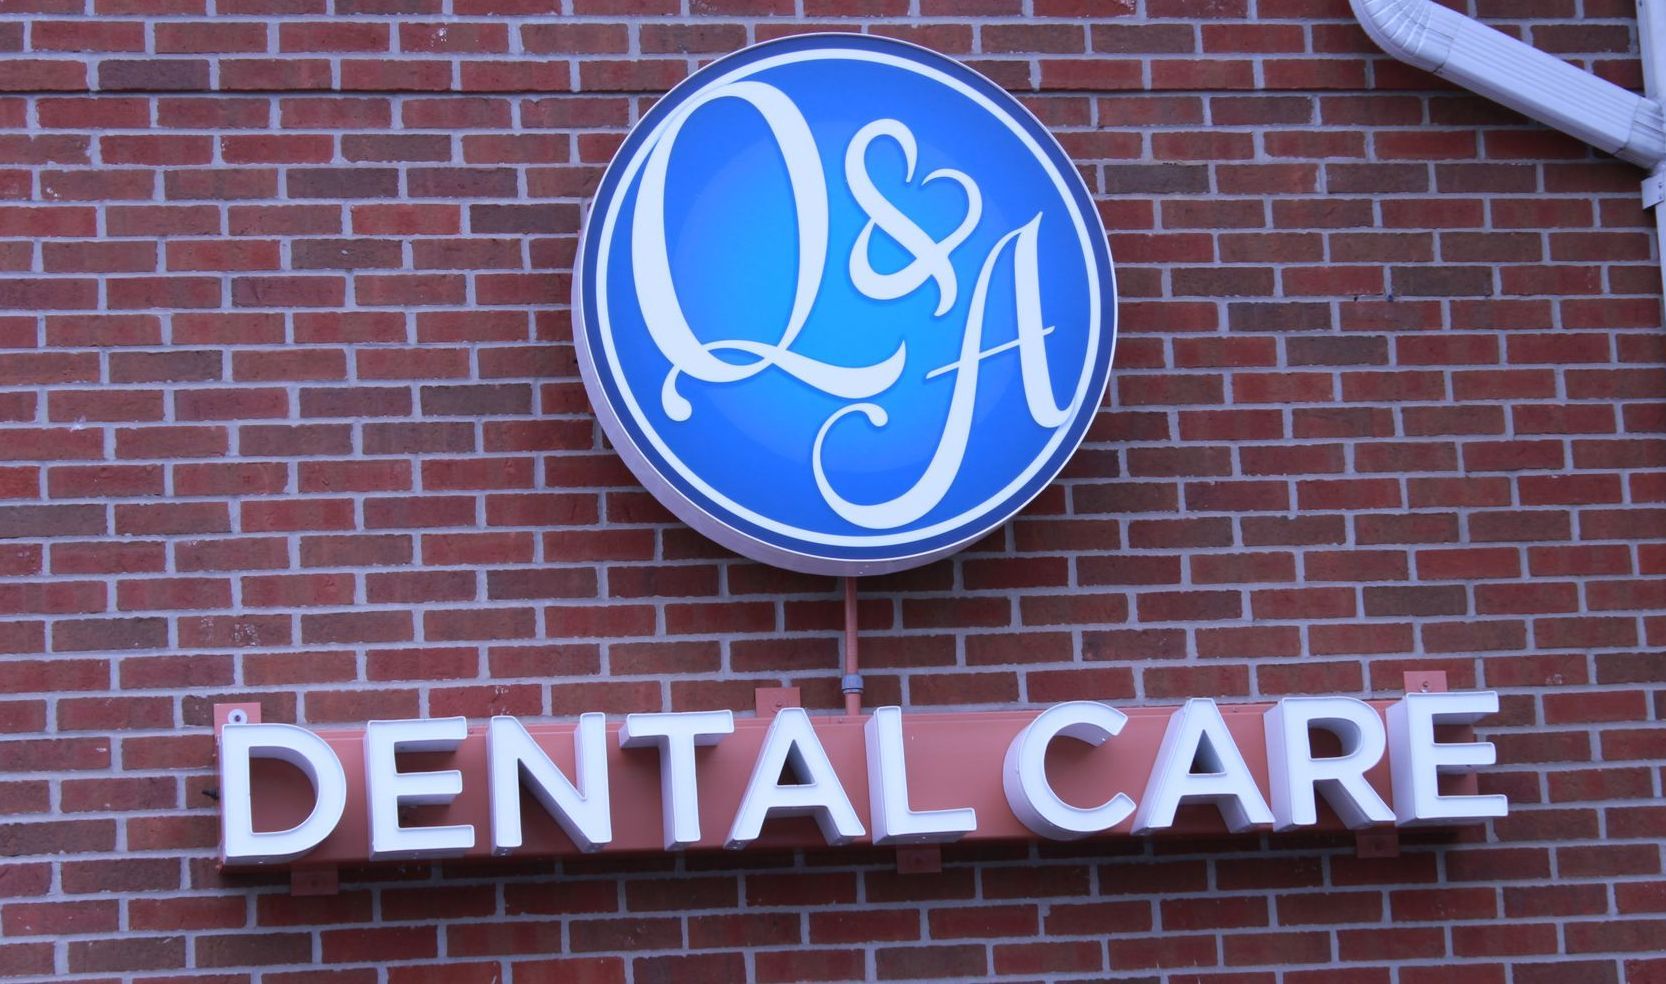 Q and A Dental care Signage